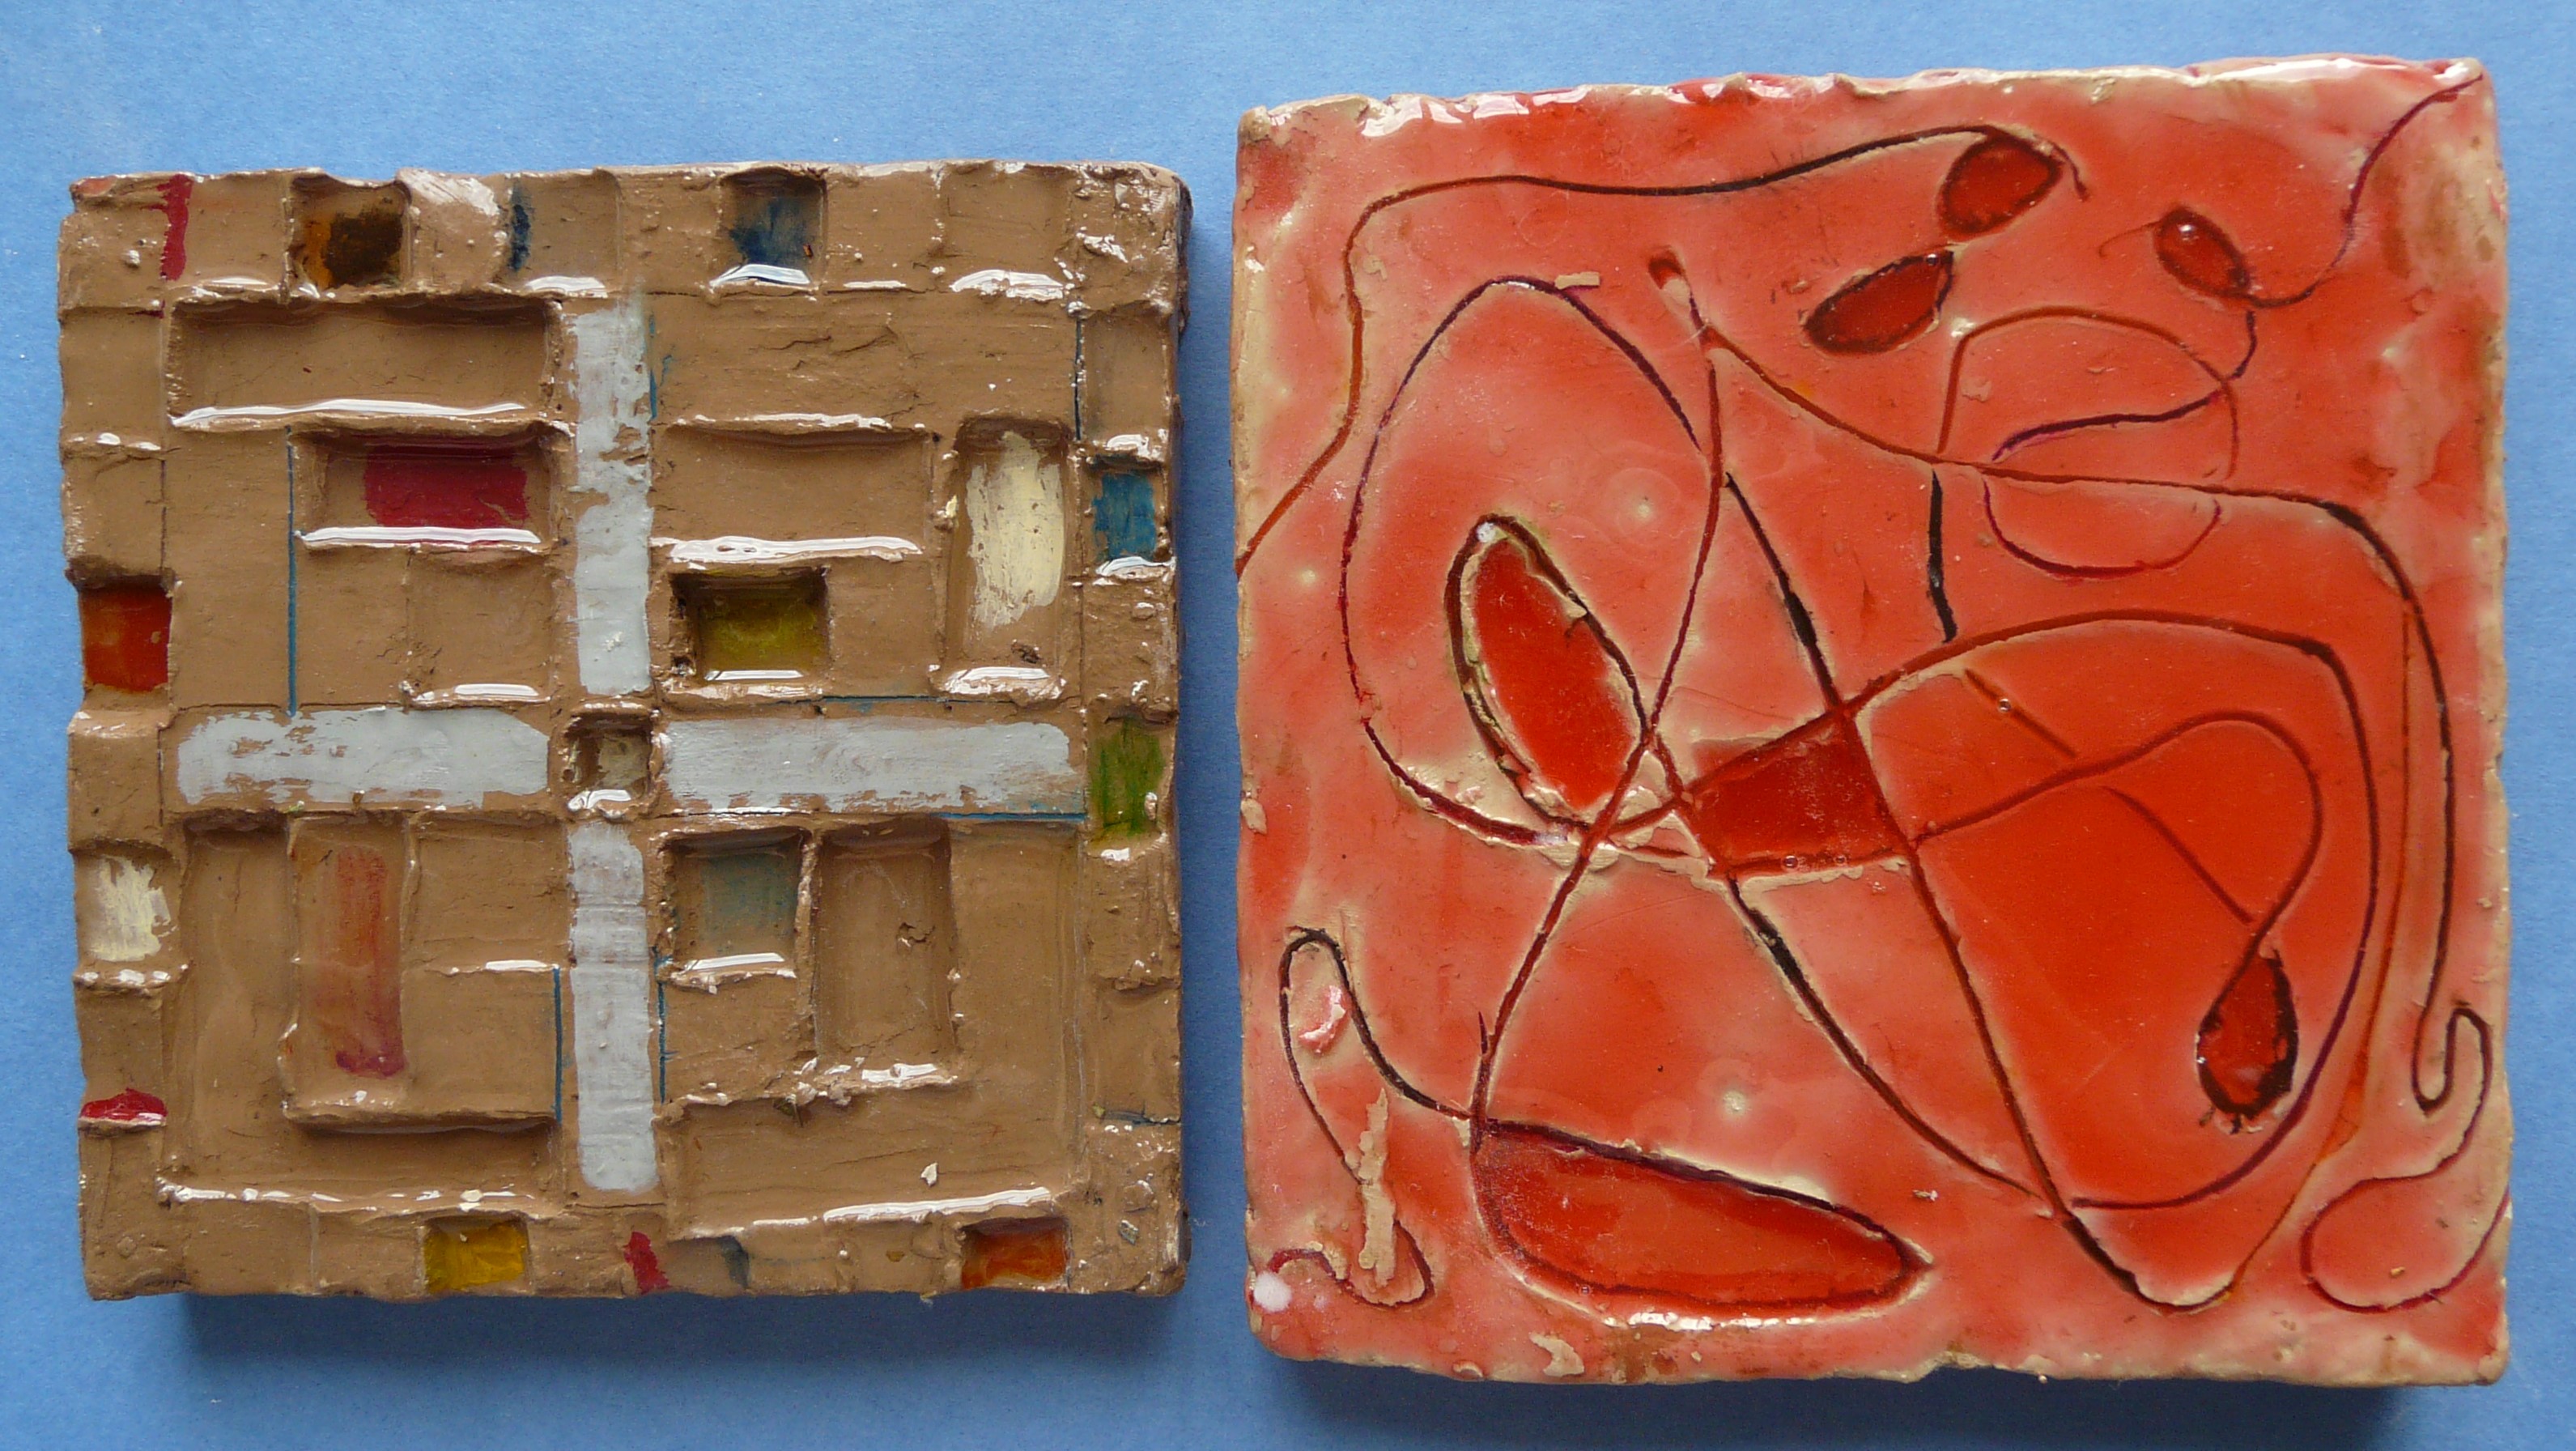  Abstract diptych 1.   